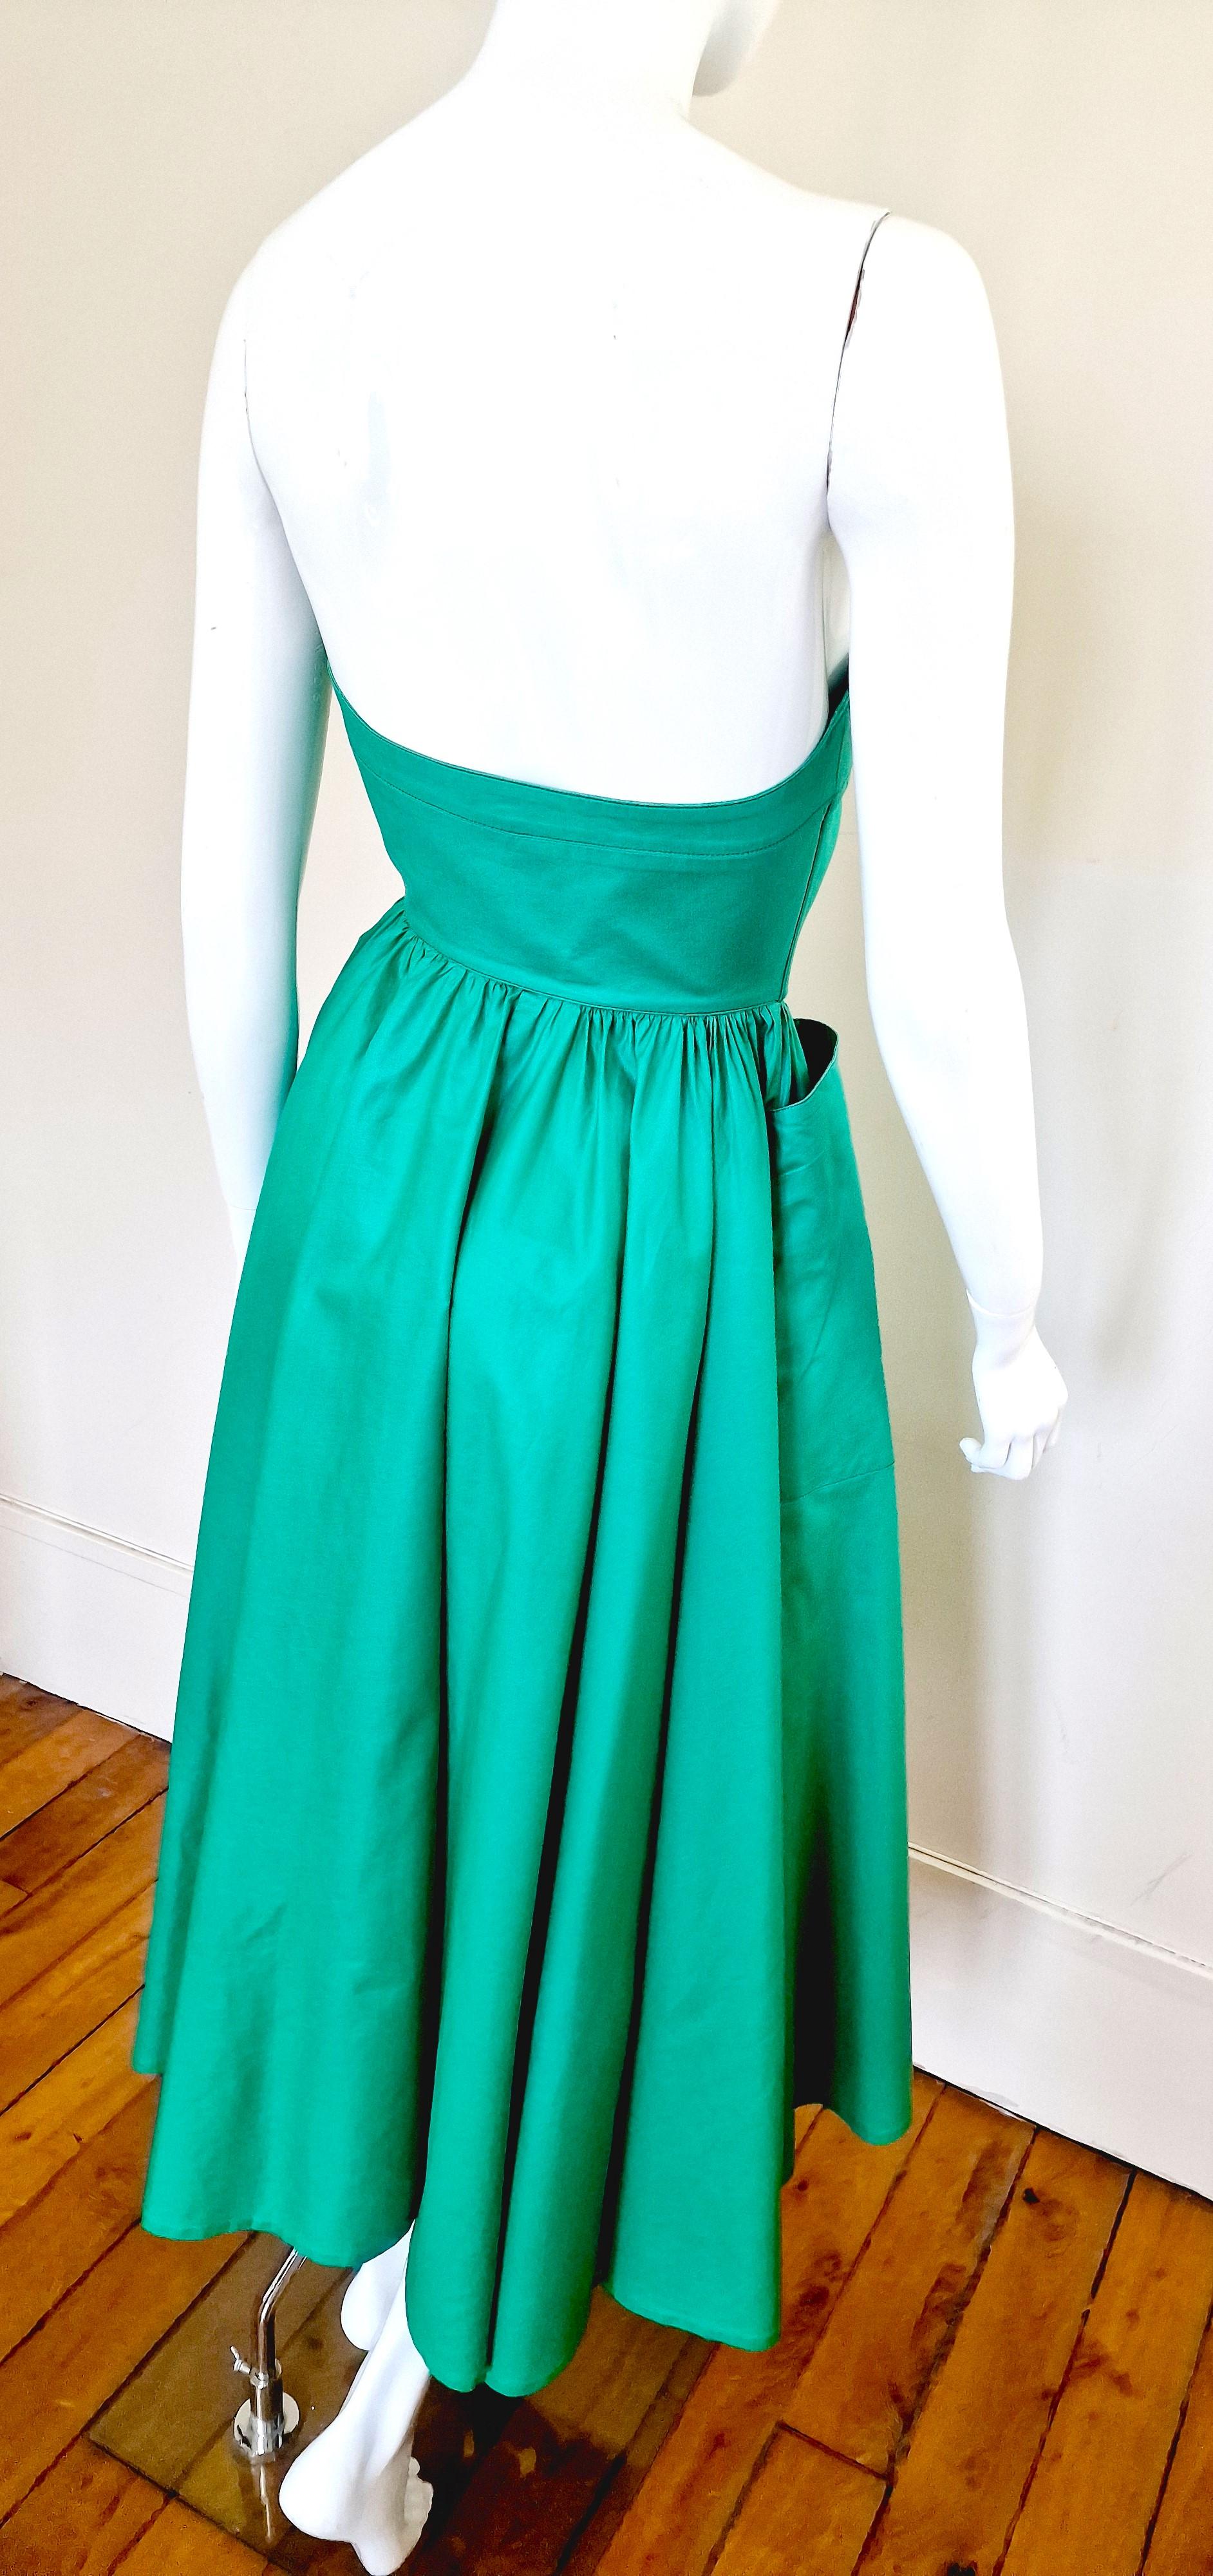 Thierry Mugler Corset Lace Up Green Vintage Couture Gown Prom Bustier Dress en vente 8